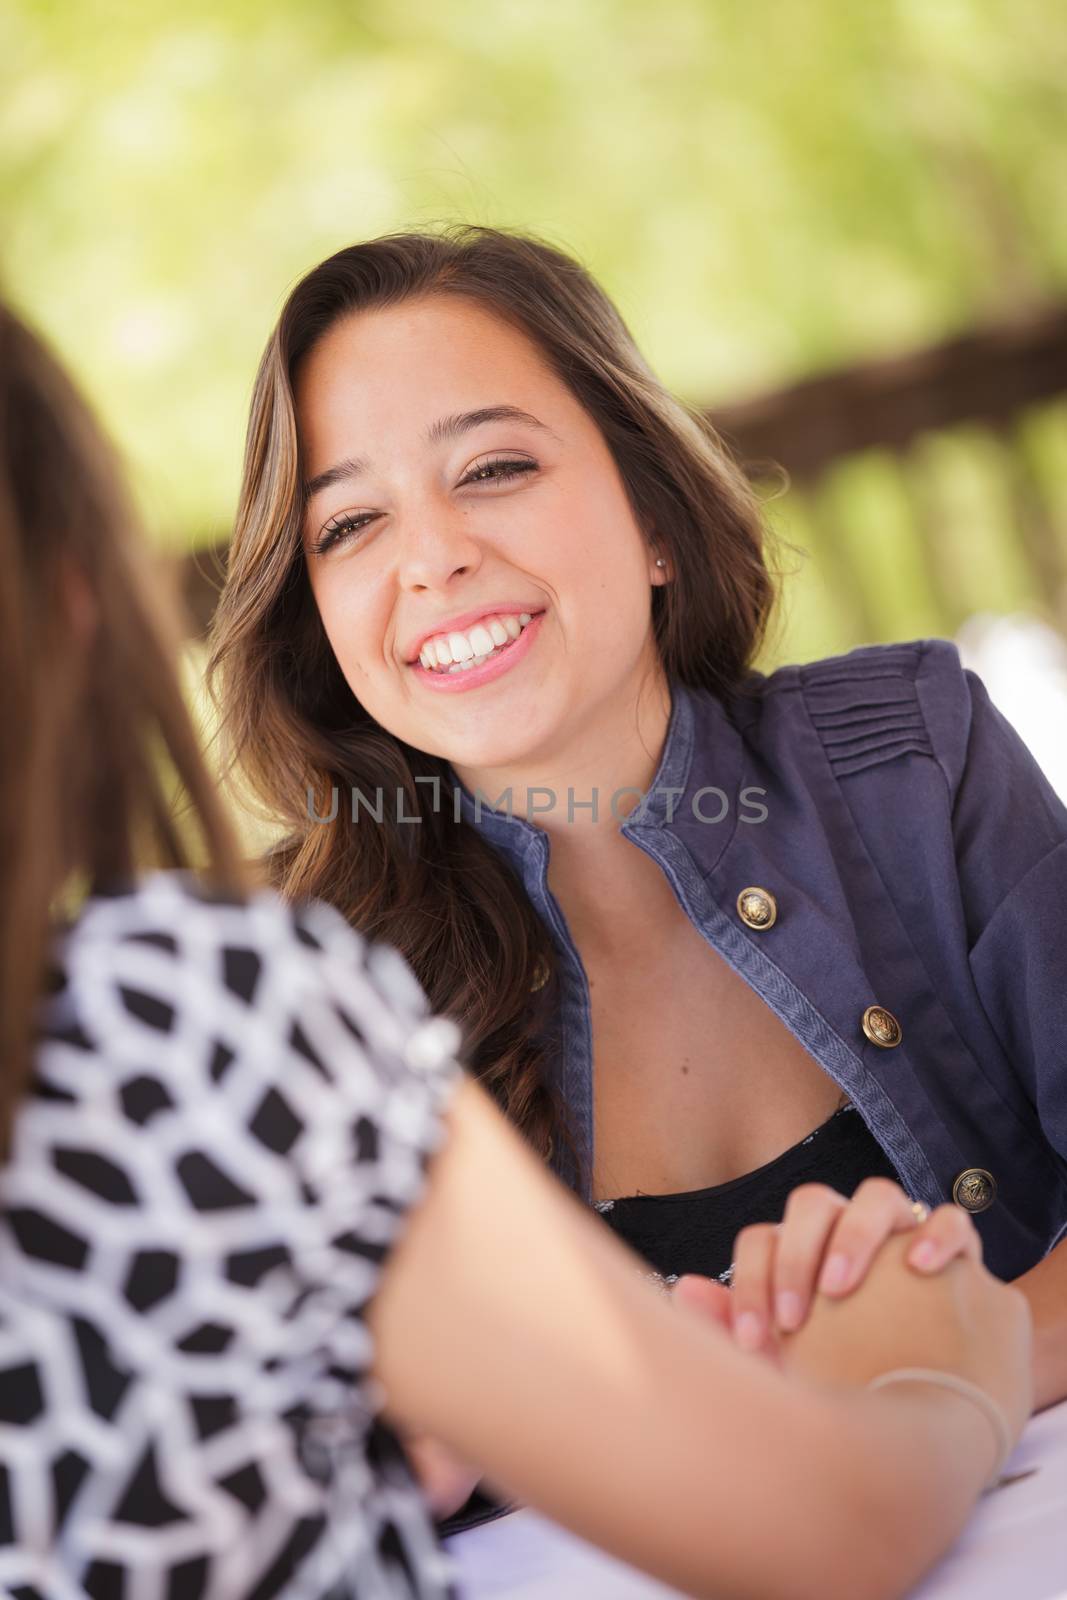 Two Mixed Race Girlfriends Having A Conversation At An Outoor Patio Table by Feverpitched